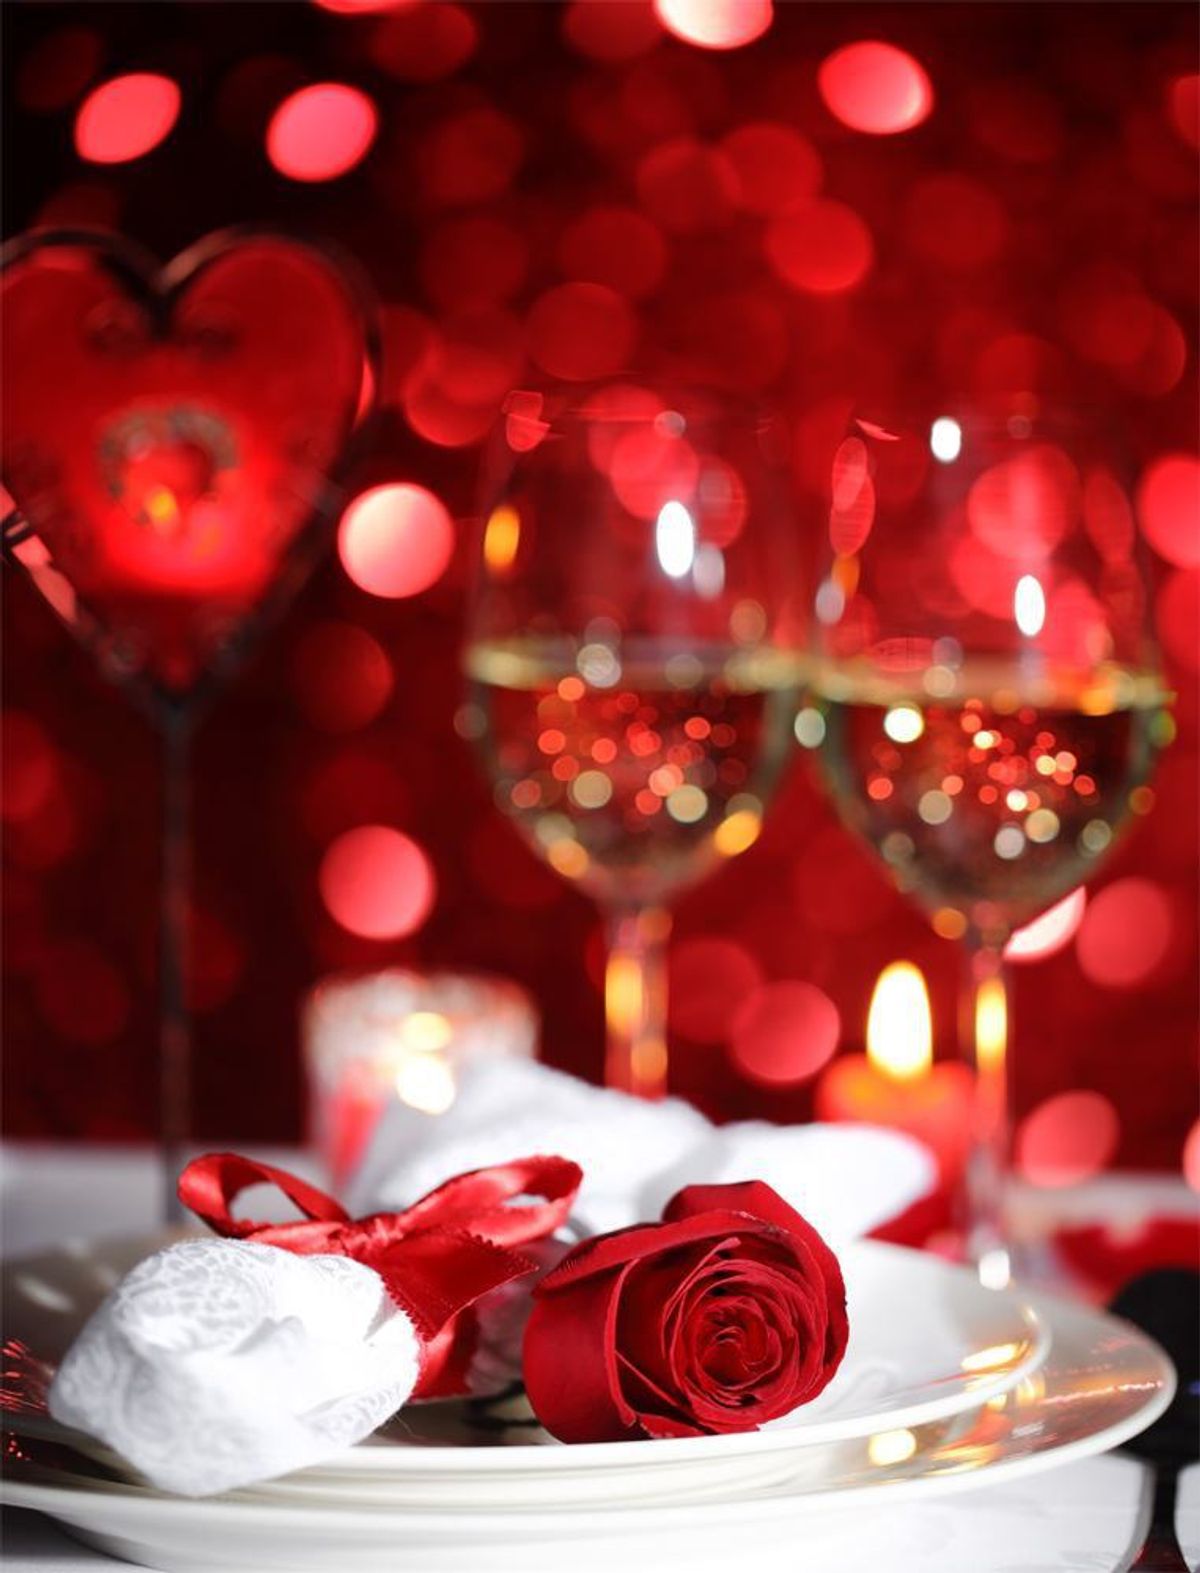 How to be Romantic on V-day in Five Easy Steps